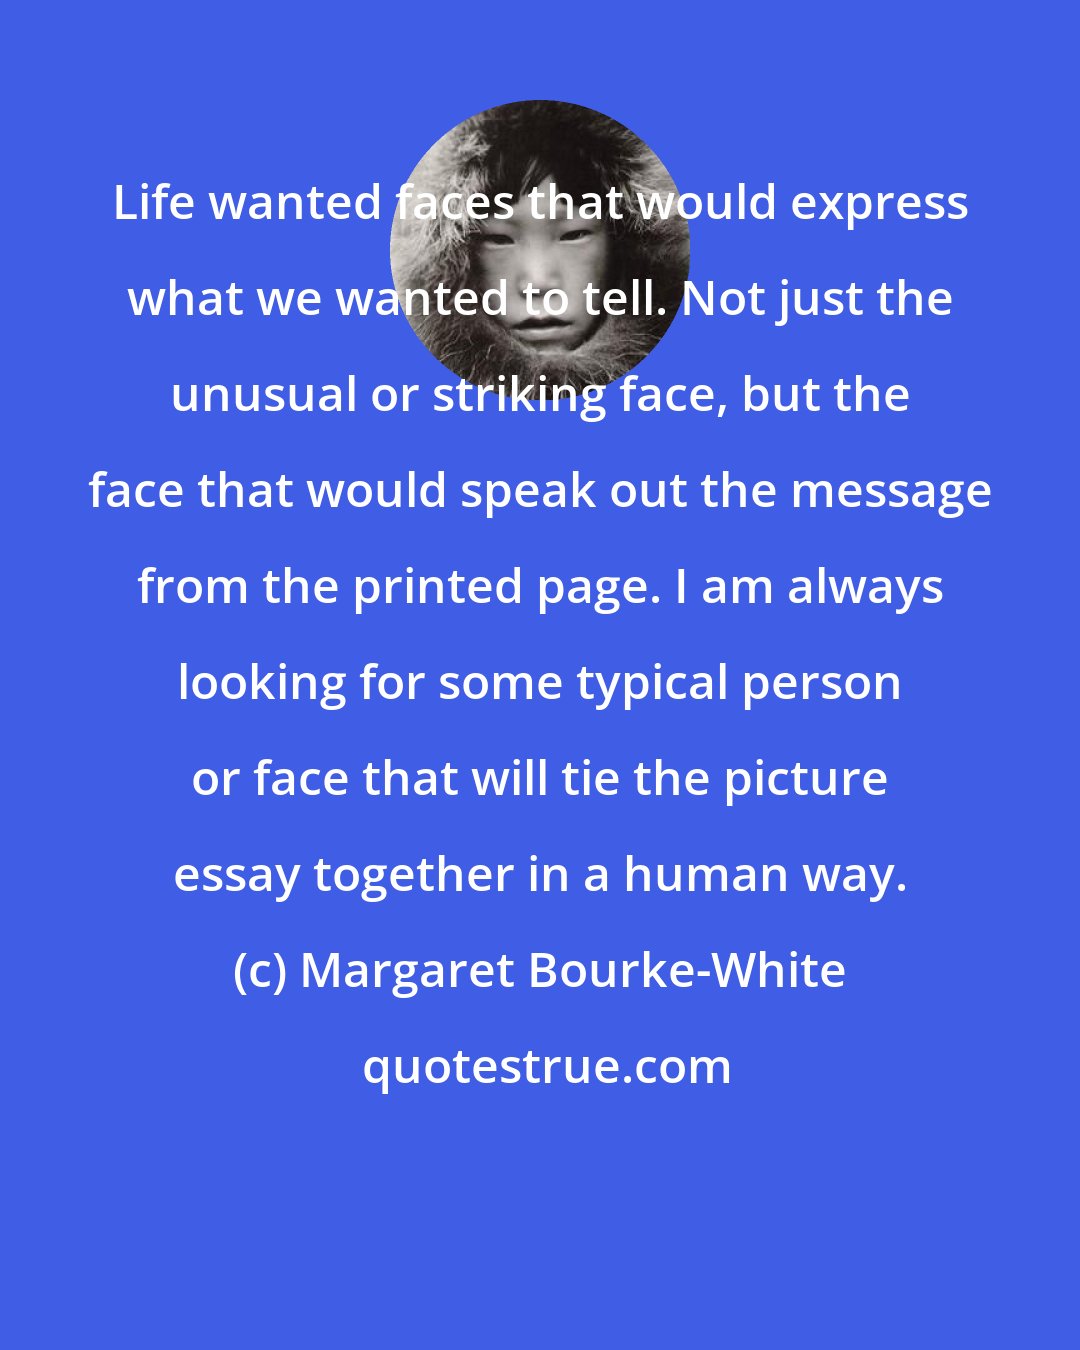 Margaret Bourke-White: Life wanted faces that would express what we wanted to tell. Not just the unusual or striking face, but the face that would speak out the message from the printed page. I am always looking for some typical person or face that will tie the picture essay together in a human way.